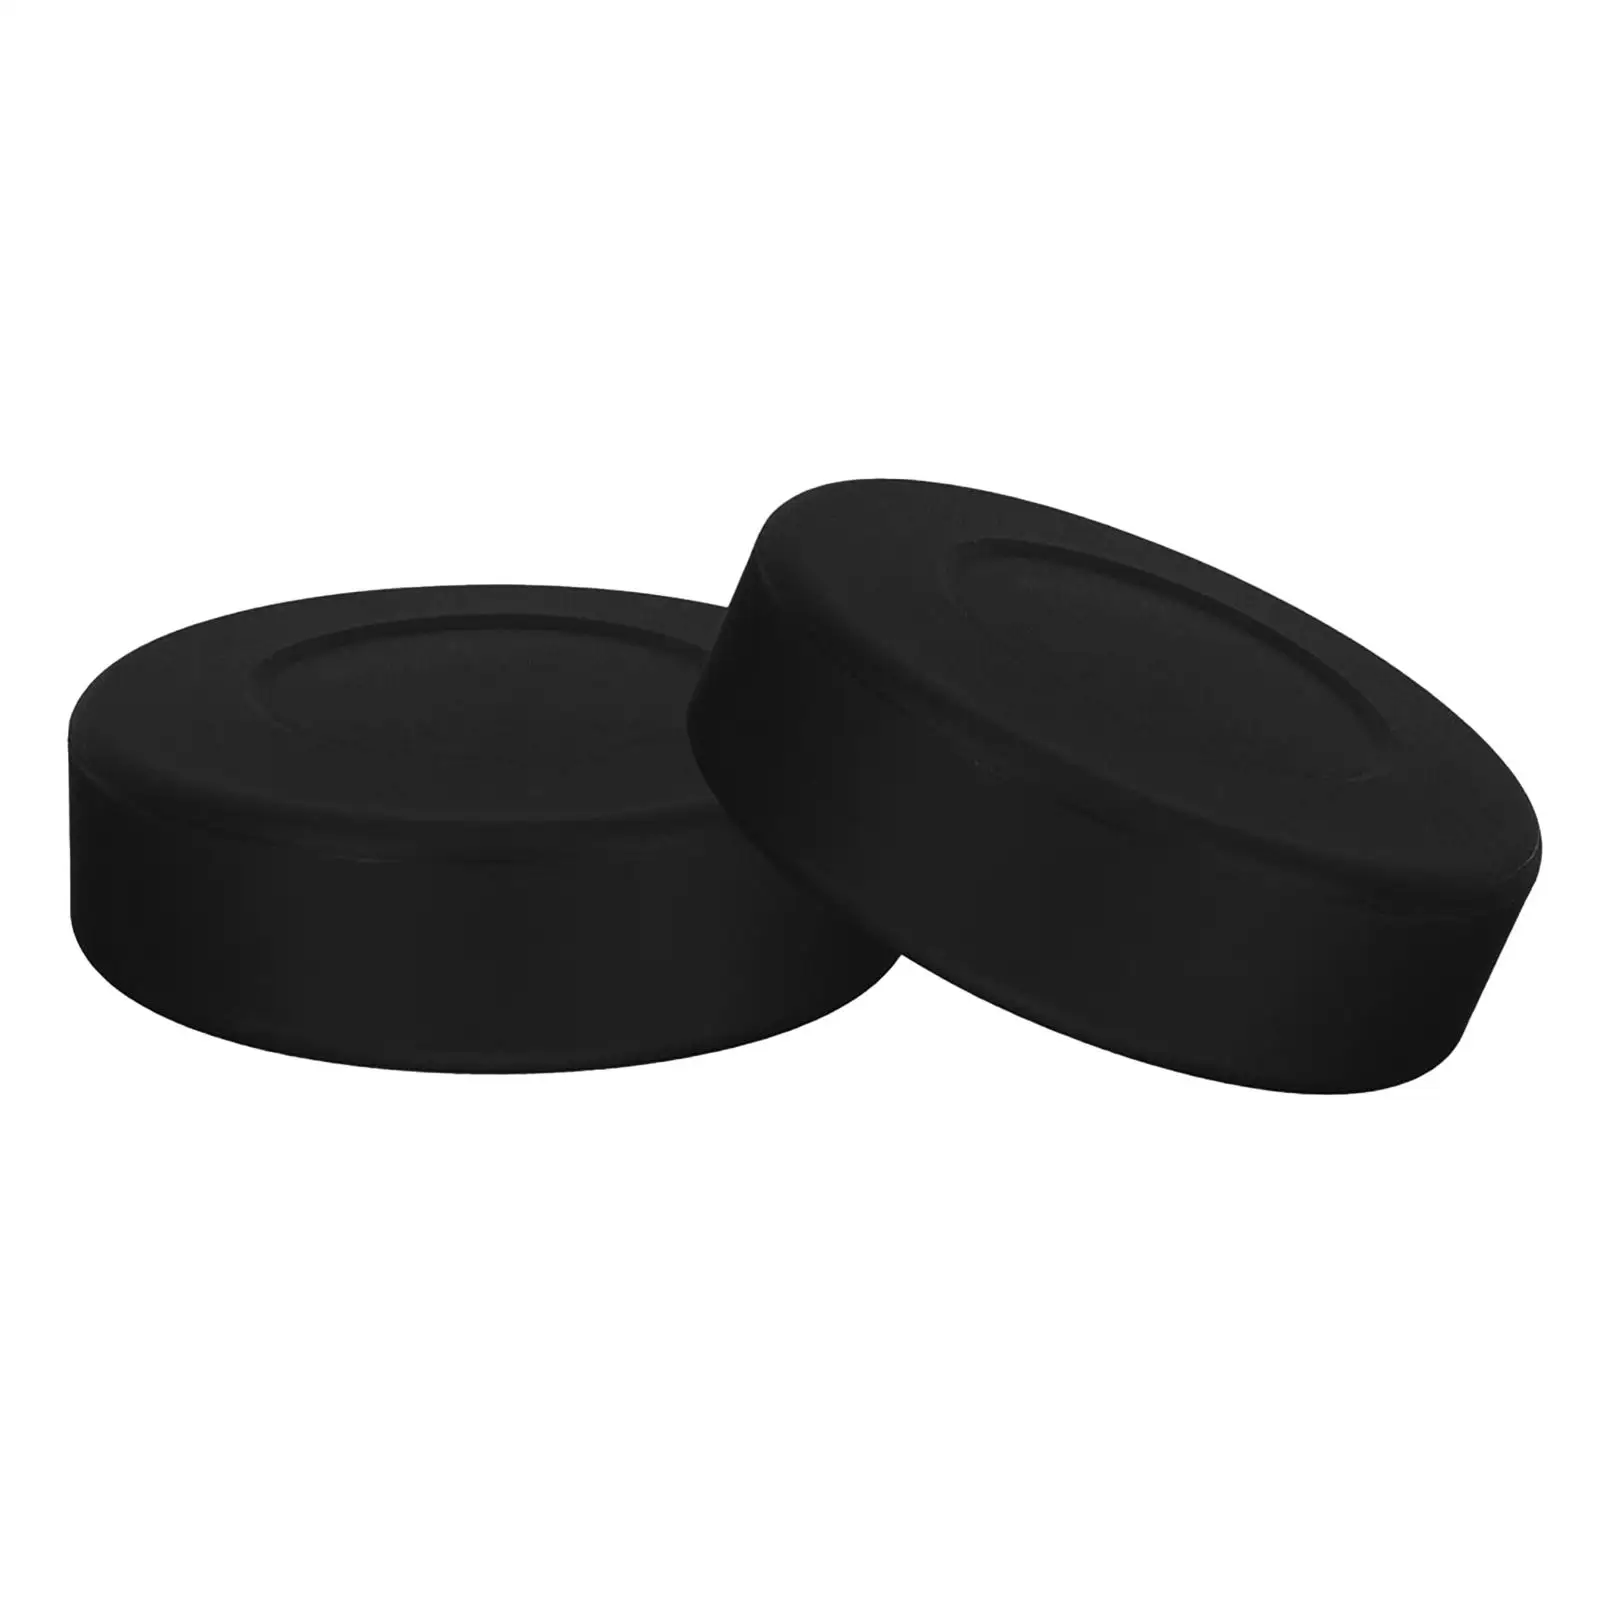 2Pcs Ice Hockey Puck Multipurpose Sturdy Wear Resistant Smooth Hockey Ball for Children Starters Teenagers Athletes Exercise